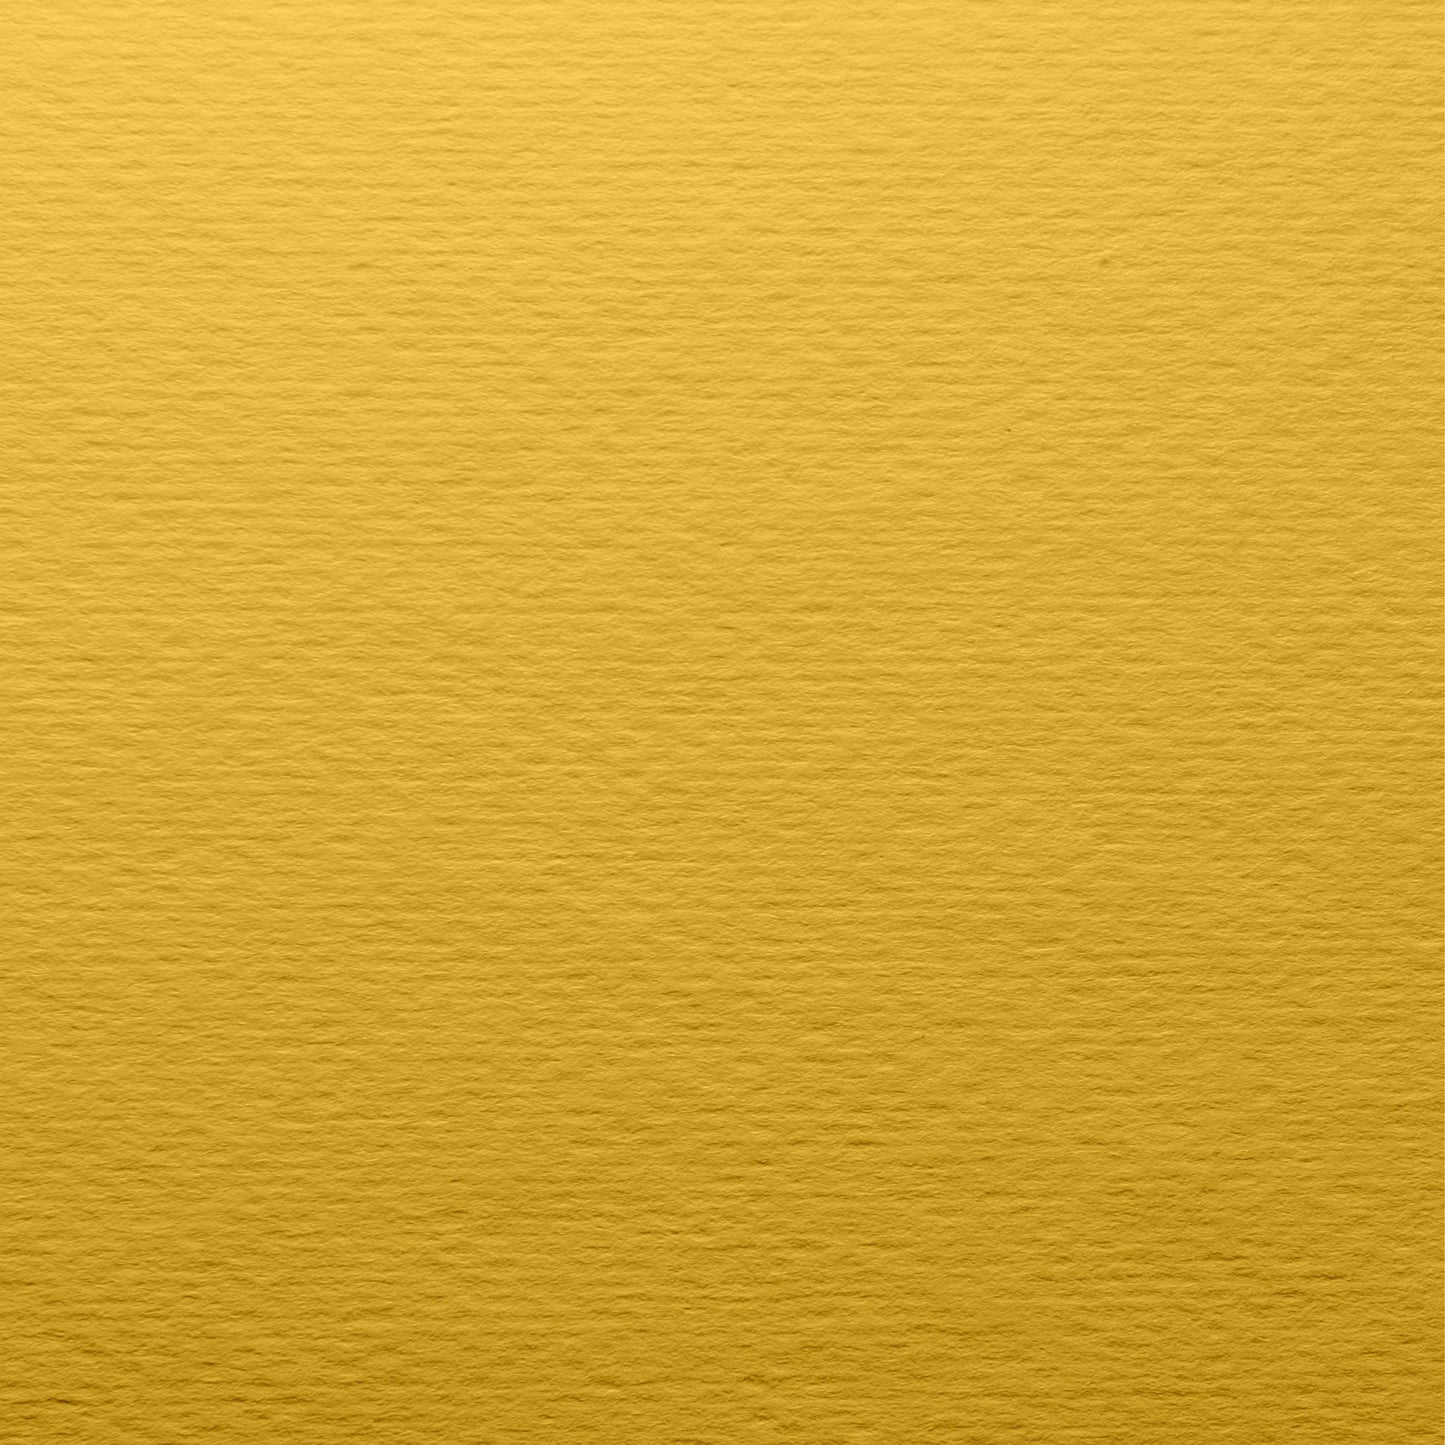 Background Cardstock Paper Texture 12 X 12 Yellow Golds